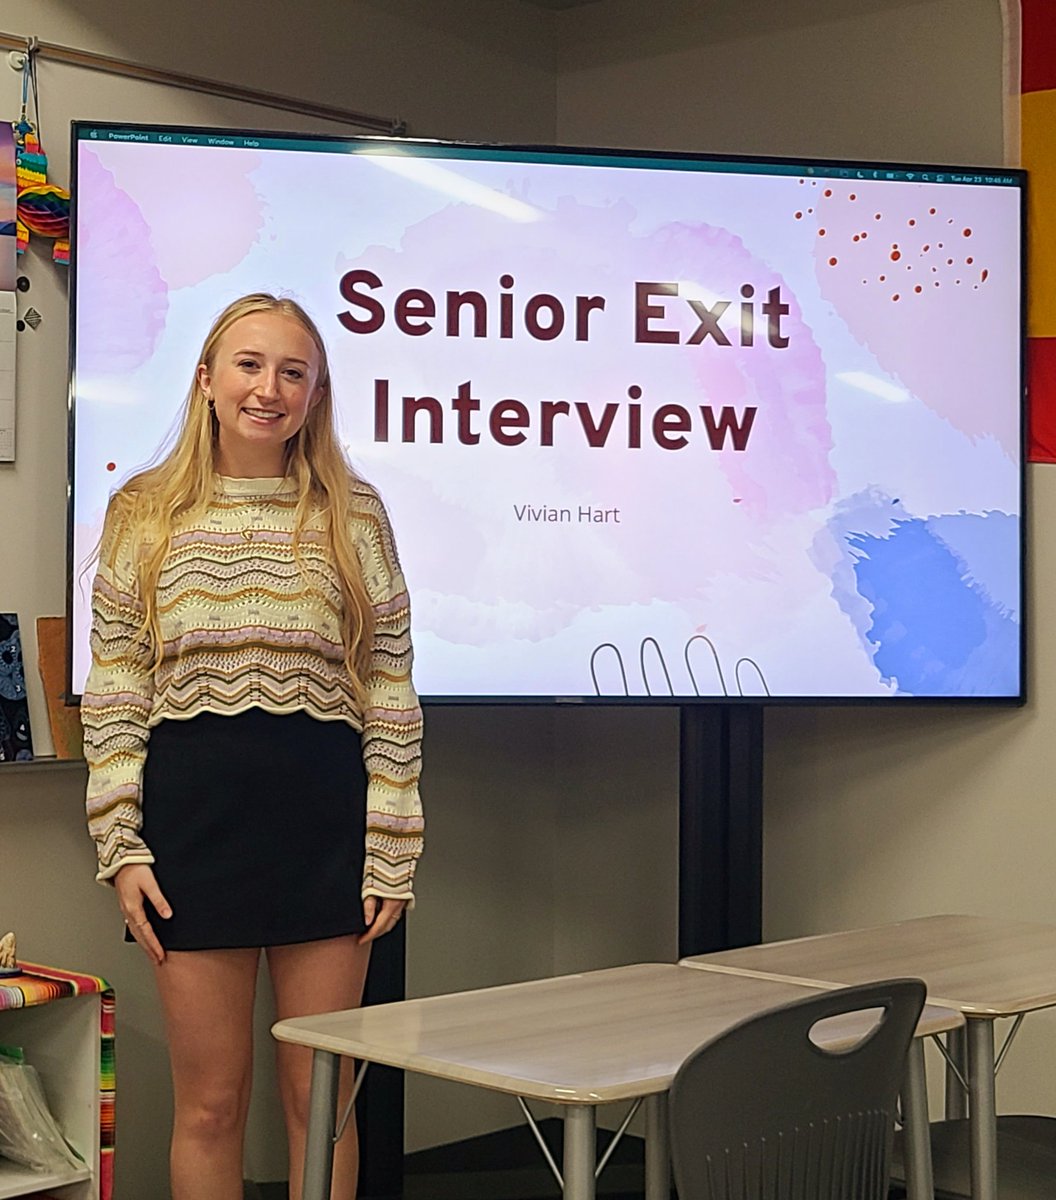 NPHS Seniors did a marvelous job presenting their Senior Exit Interviews today. It was amazing to witness the passion these students have for their unique interests. @VoelzJames @MooreNPJH @MitchanerNPHS #wearedragons #newpalproud